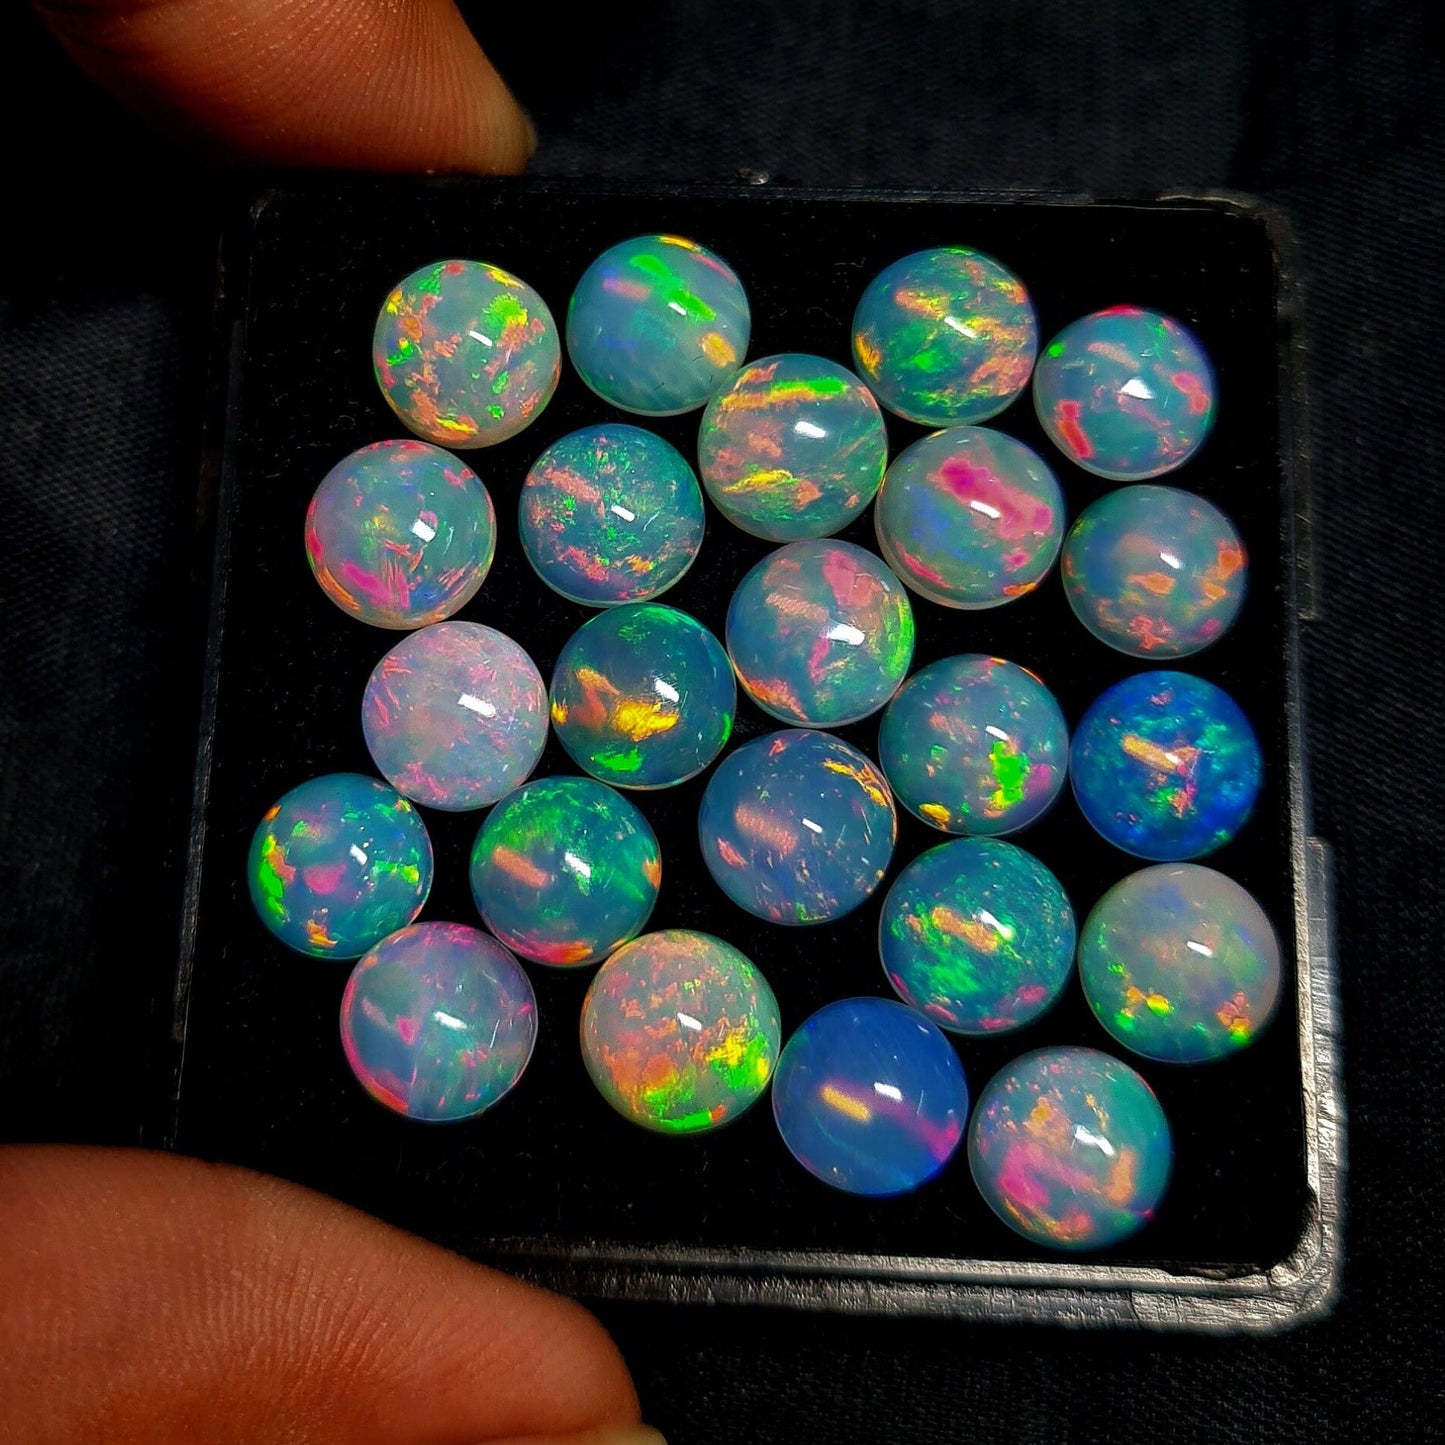 Gorgeous Ethiopian Opal 8 mm Calibrated Round Cabochon, Multi Play Fire High Quality Gemstone, Use for Jewelry